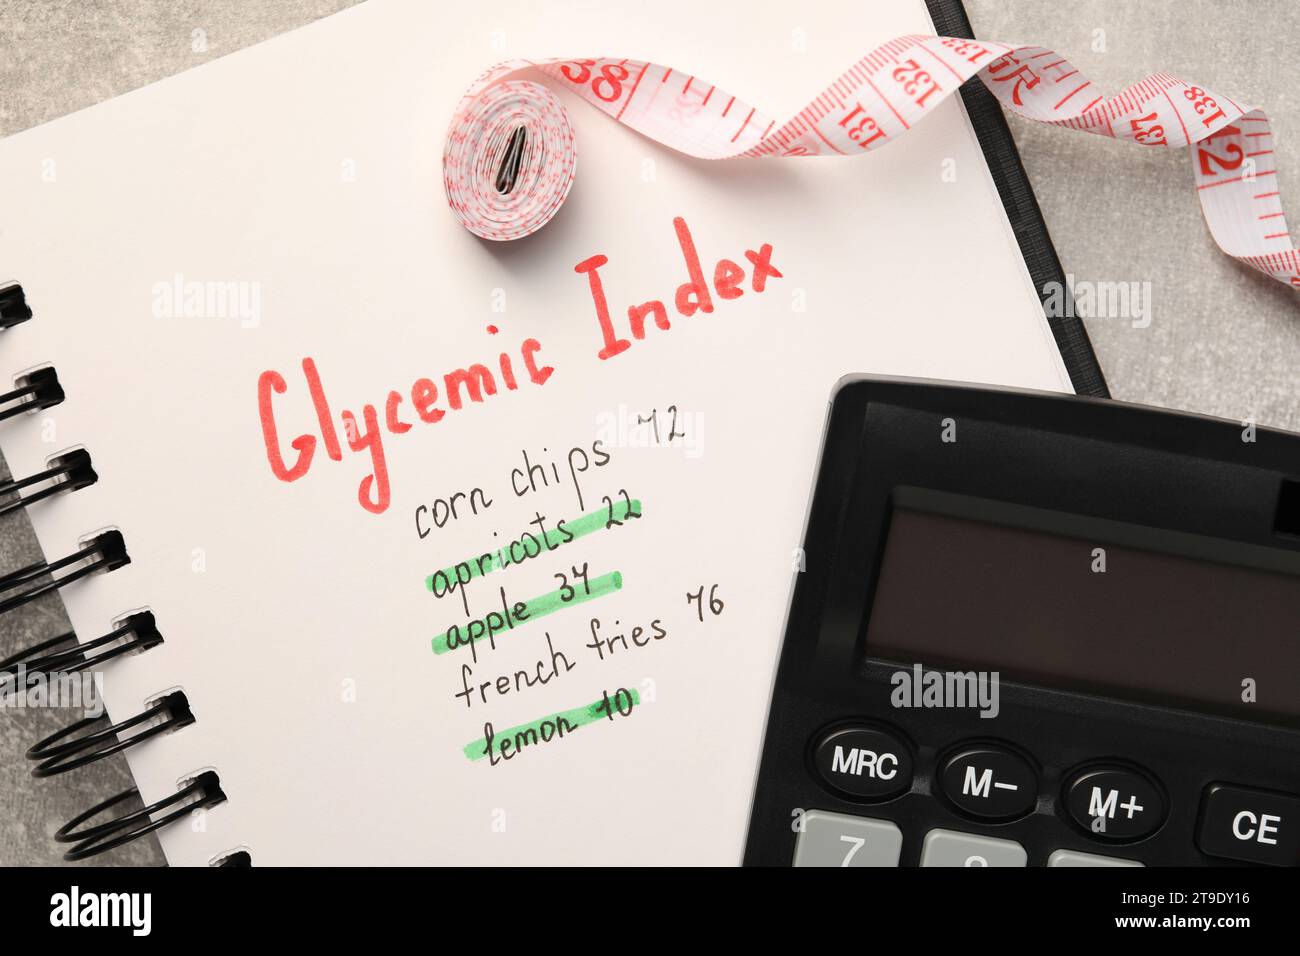 Glycemic Index. Notebook with information, measuring tape and calculator on light grey table, flat lay Stock Photo